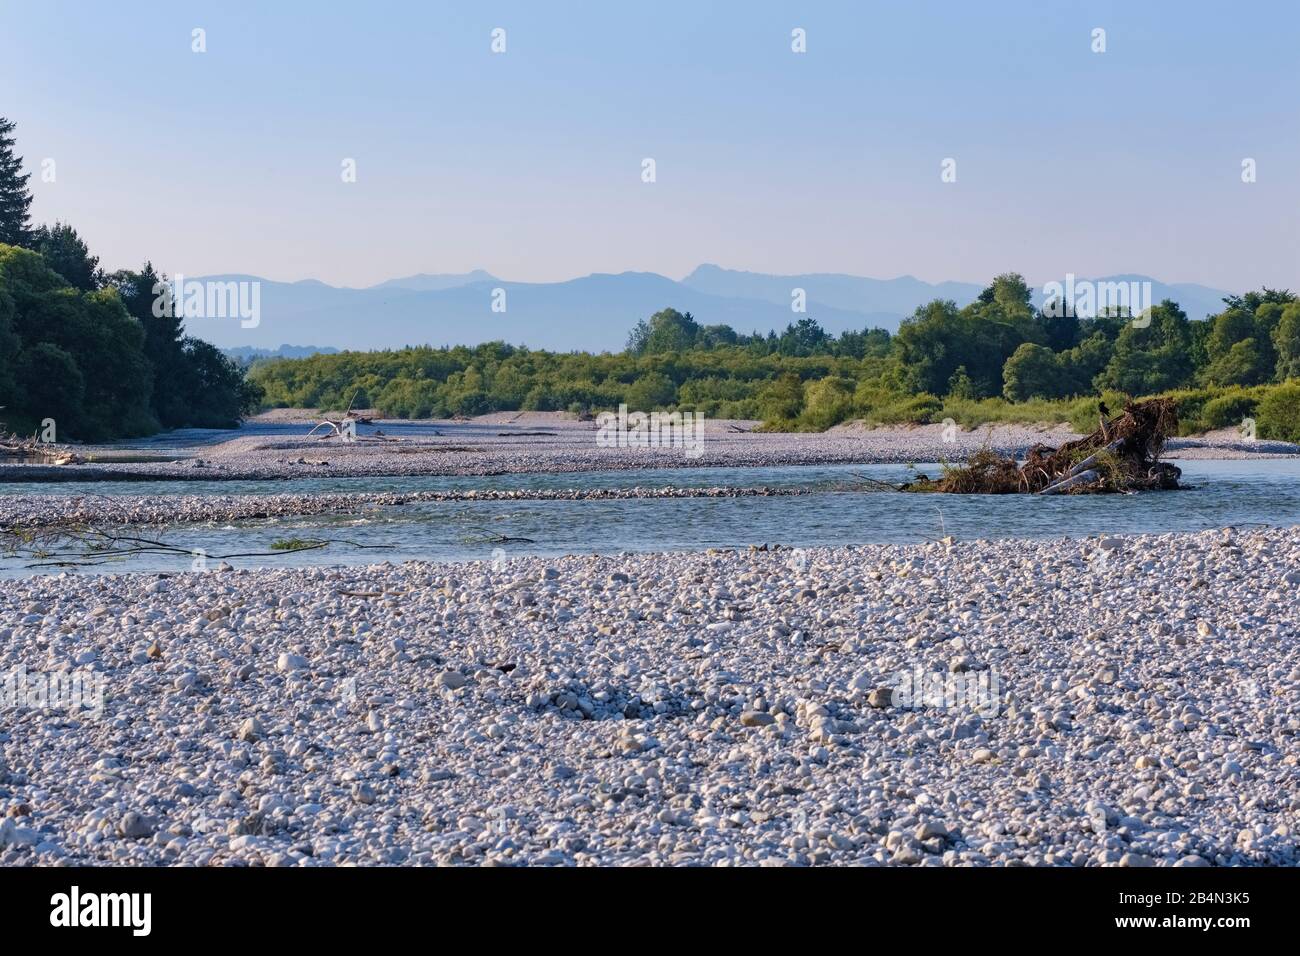 Isar with gravel banks, nature reserve Isarauen bei Geretsried, Bavaria, Germany Stock Photo